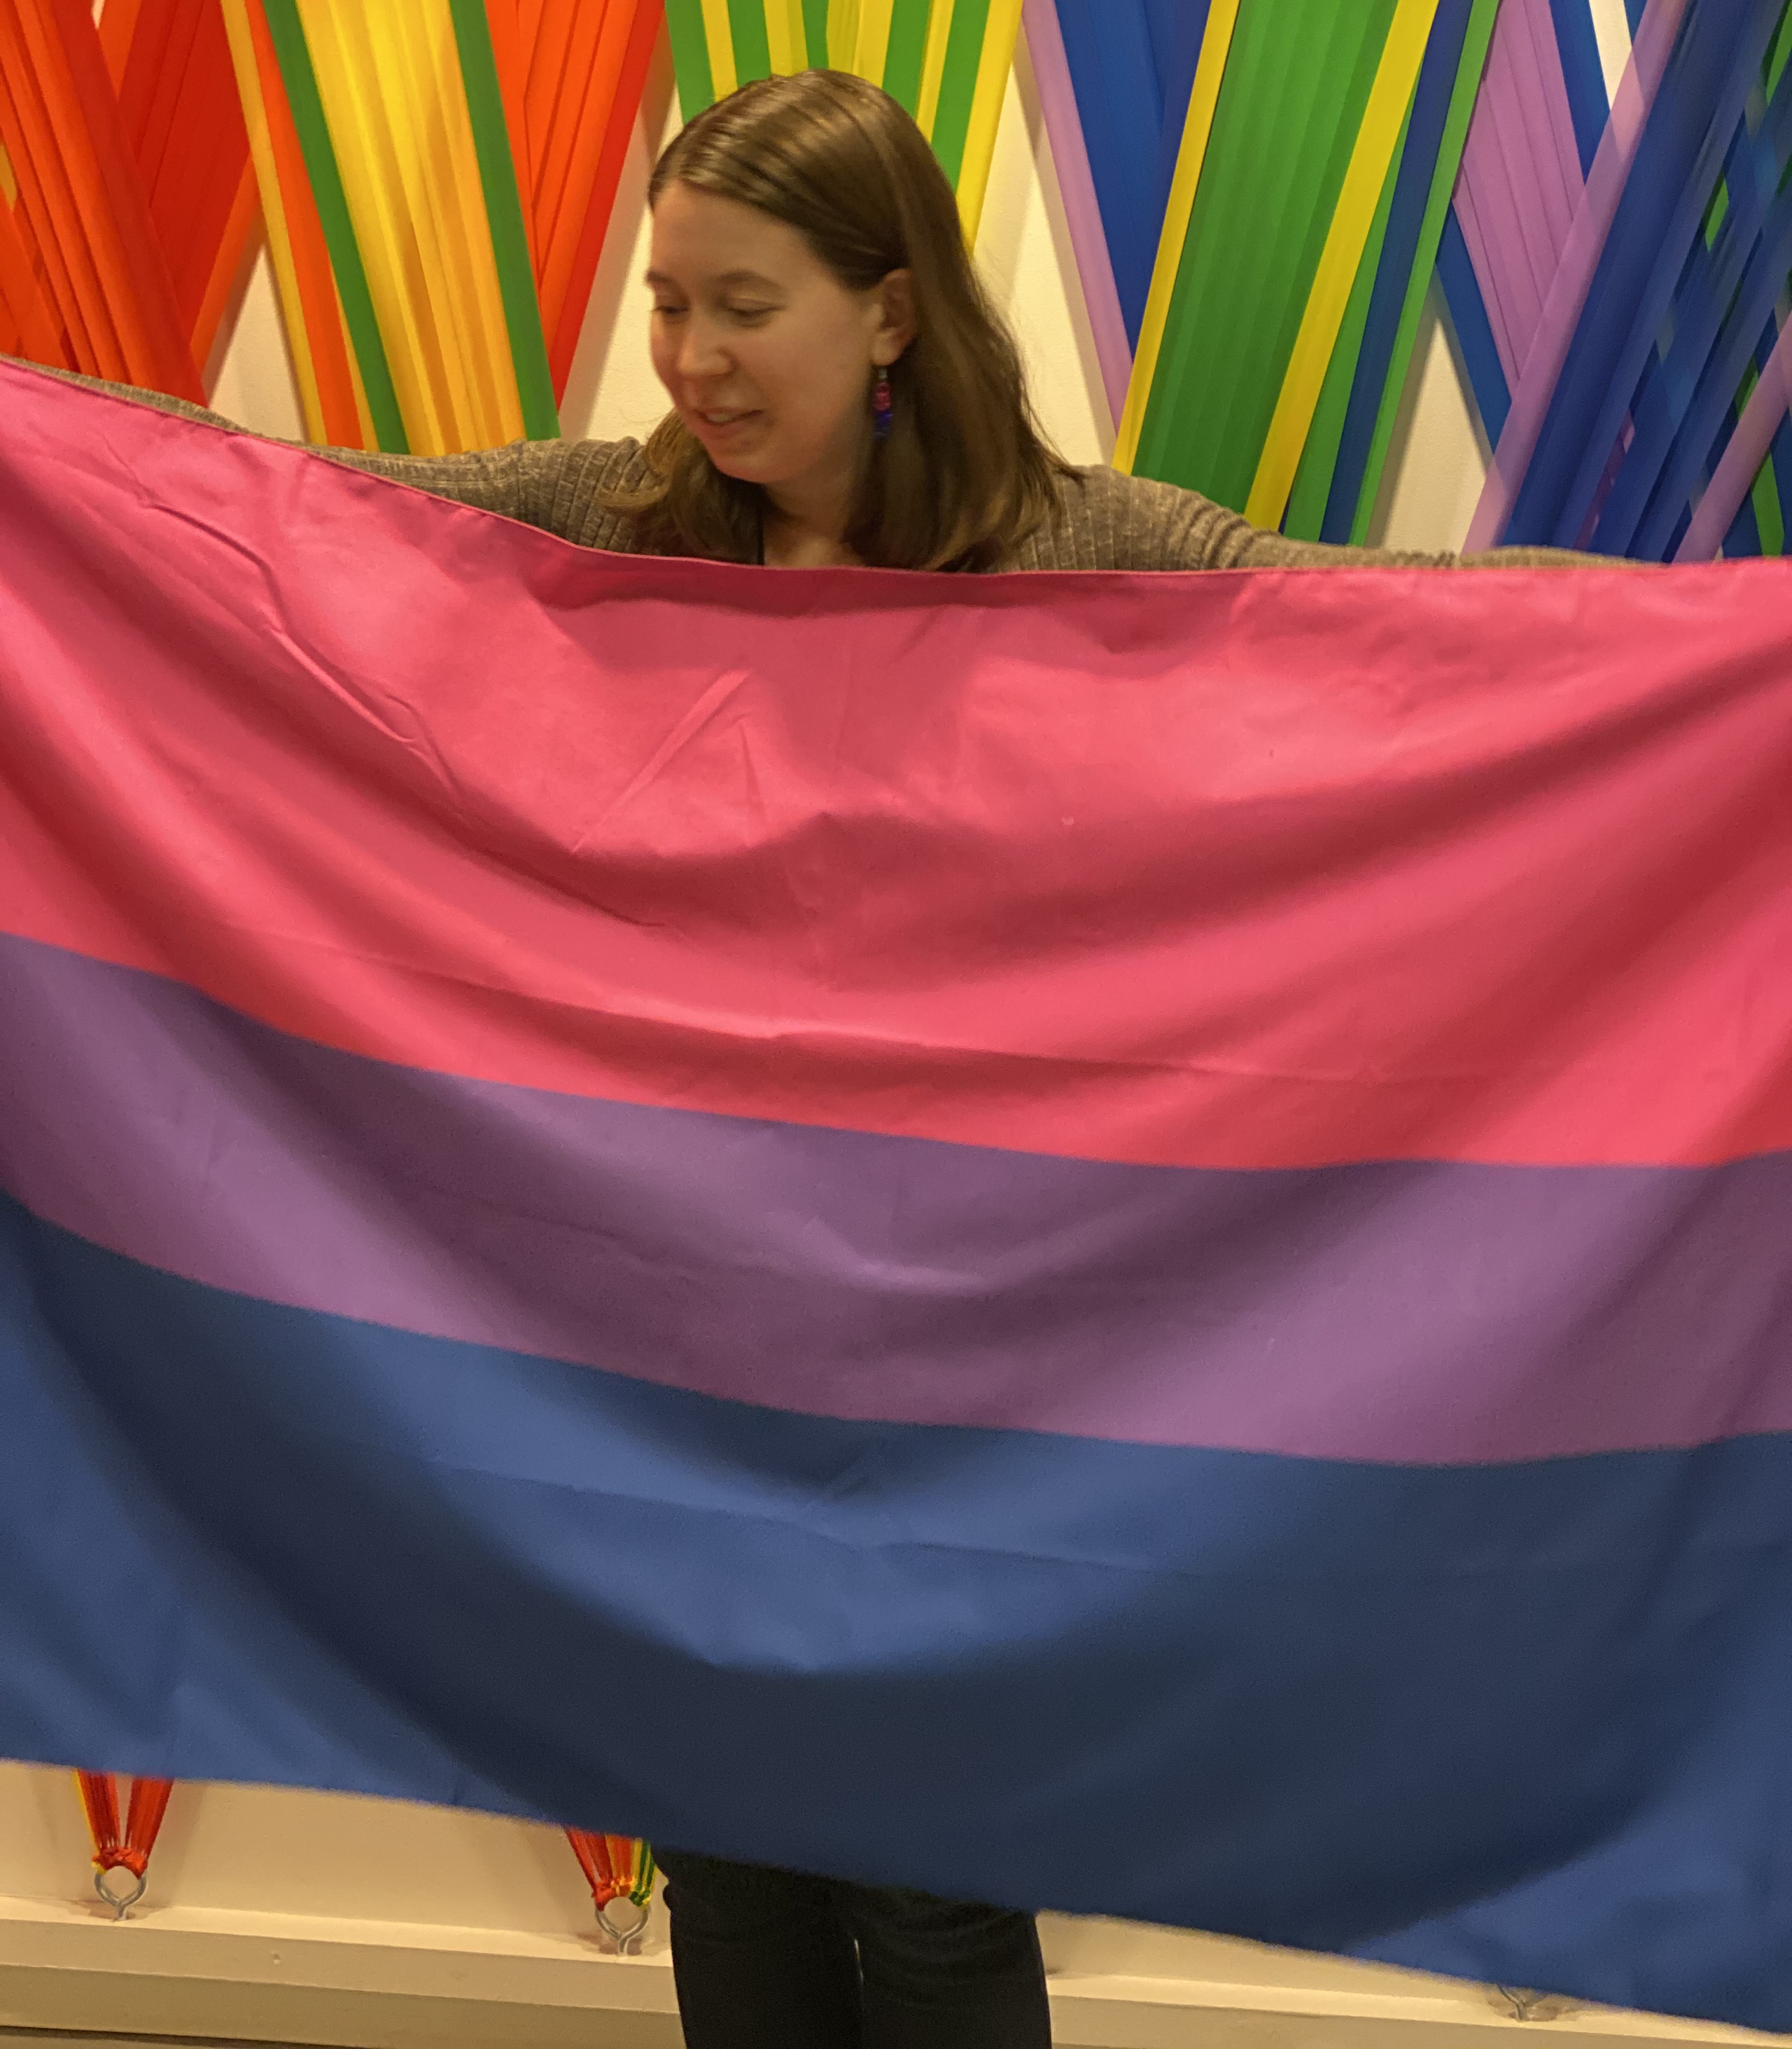 M holds a bi flag (pink stripe, purple stripe, blue stripe) in front of themself and looks down at the flag. Rainbow decorations are behind them.